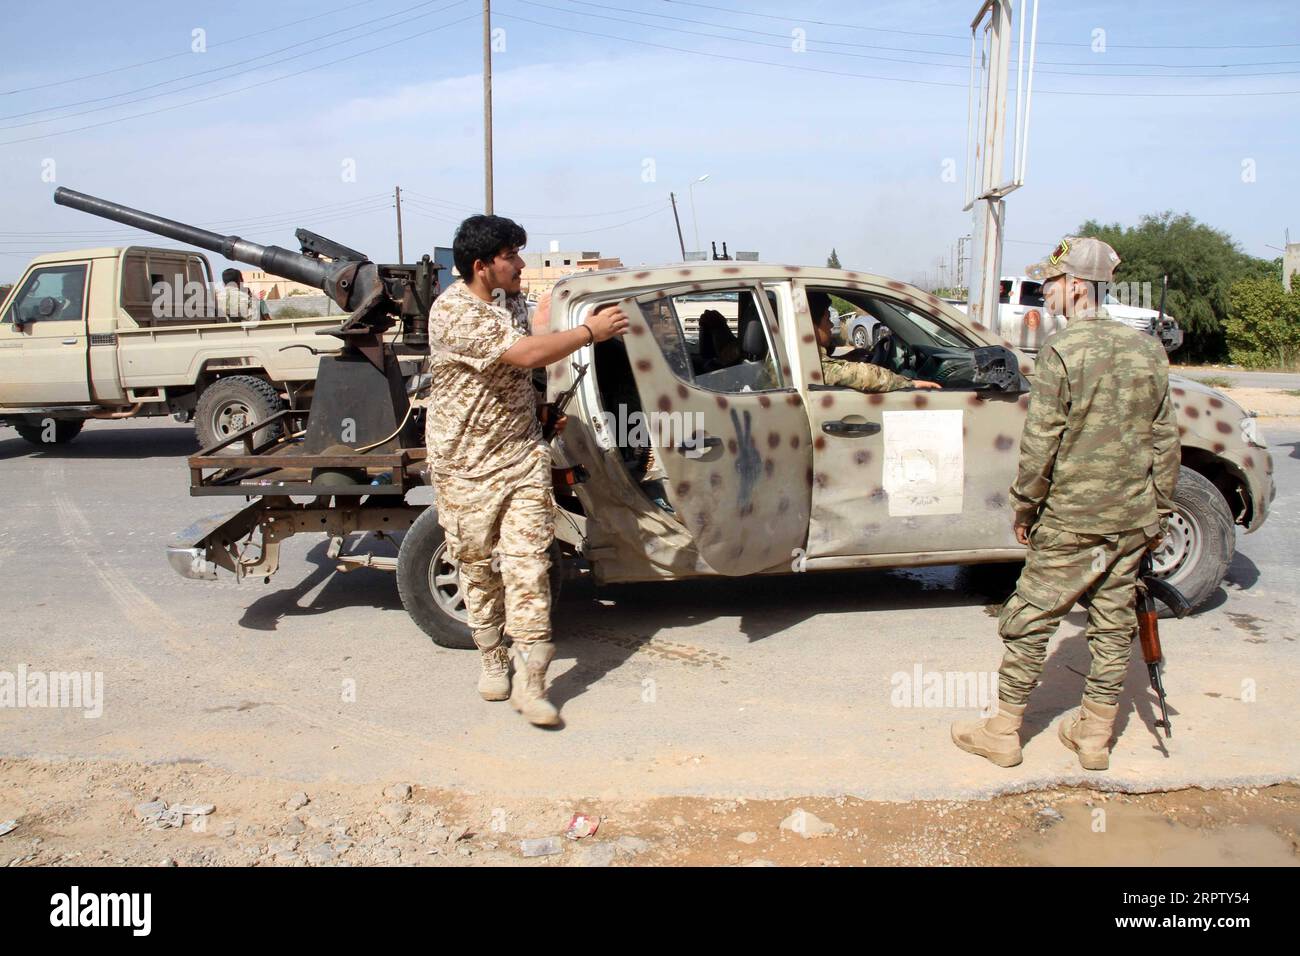 200419 -- TRIPOLI, April 19, 2020 Xinhua -- Fighters of the UN-backed Government of National Accord GNA are seen in Tarhuna, some 90 kilometers south of the capital Tripoli, Libya, April 18, 2020. The UN-backed Libyan government said Saturday it launched a massive attack on the rival east-based army in Tarhuna city, killing eight soldiers of the army and capturing more than 100 others. The government s forces said they launched 17 airstrikes on the east-based army positions in Tarhuna, seizing a number of military vehicles. Photo by Hamza Turkia/Xinhua LIBYA-TRIPOLI-ATTACK PUBLICATIONxNOTxINxC Stock Photo